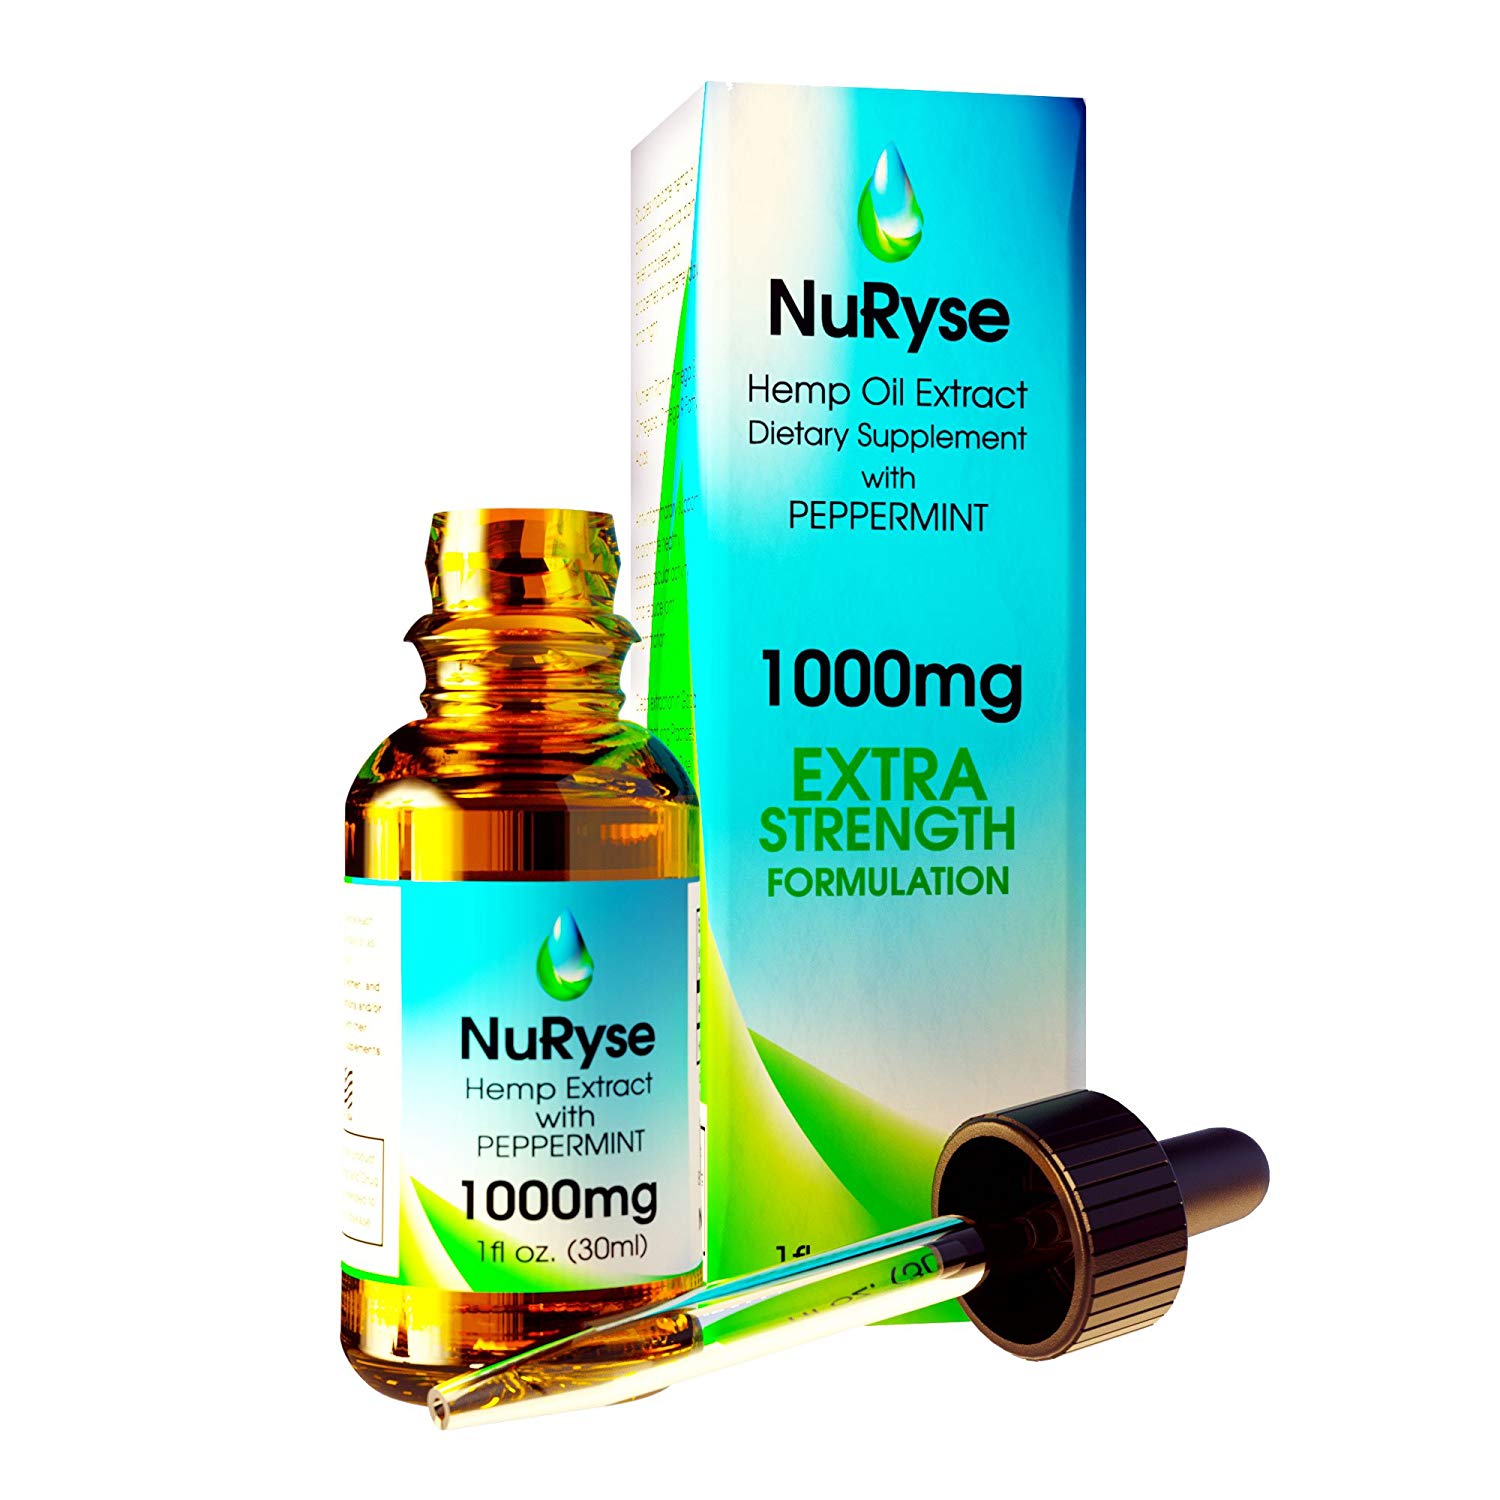 Review of All-Natural Hemp Oil Extract Drops: 1000 mg Herbal Supplement for Daily Use By NuRyse